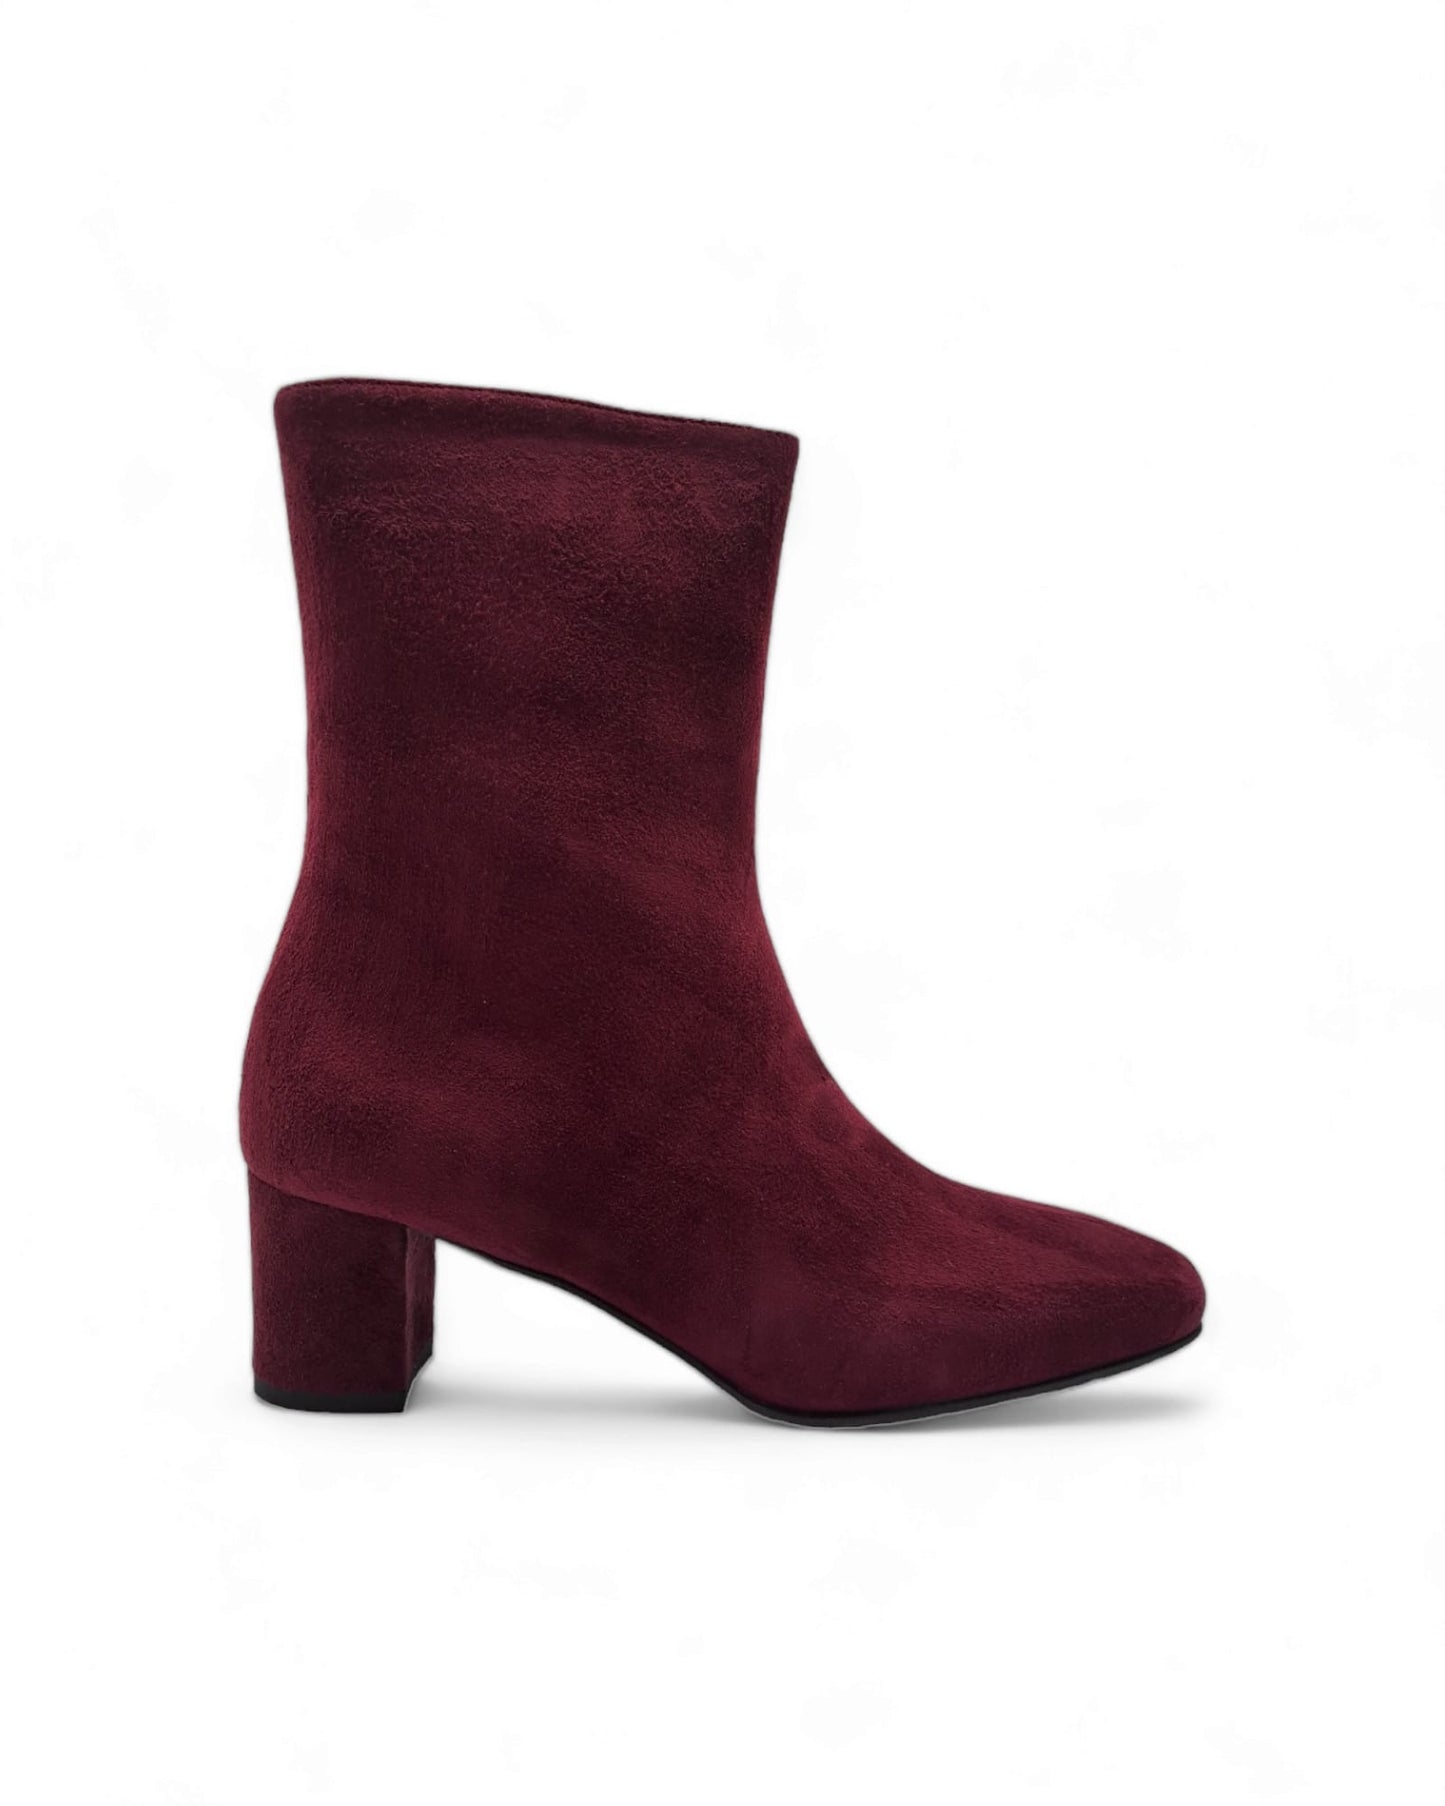 Silvana ankle boot in Barolo suede